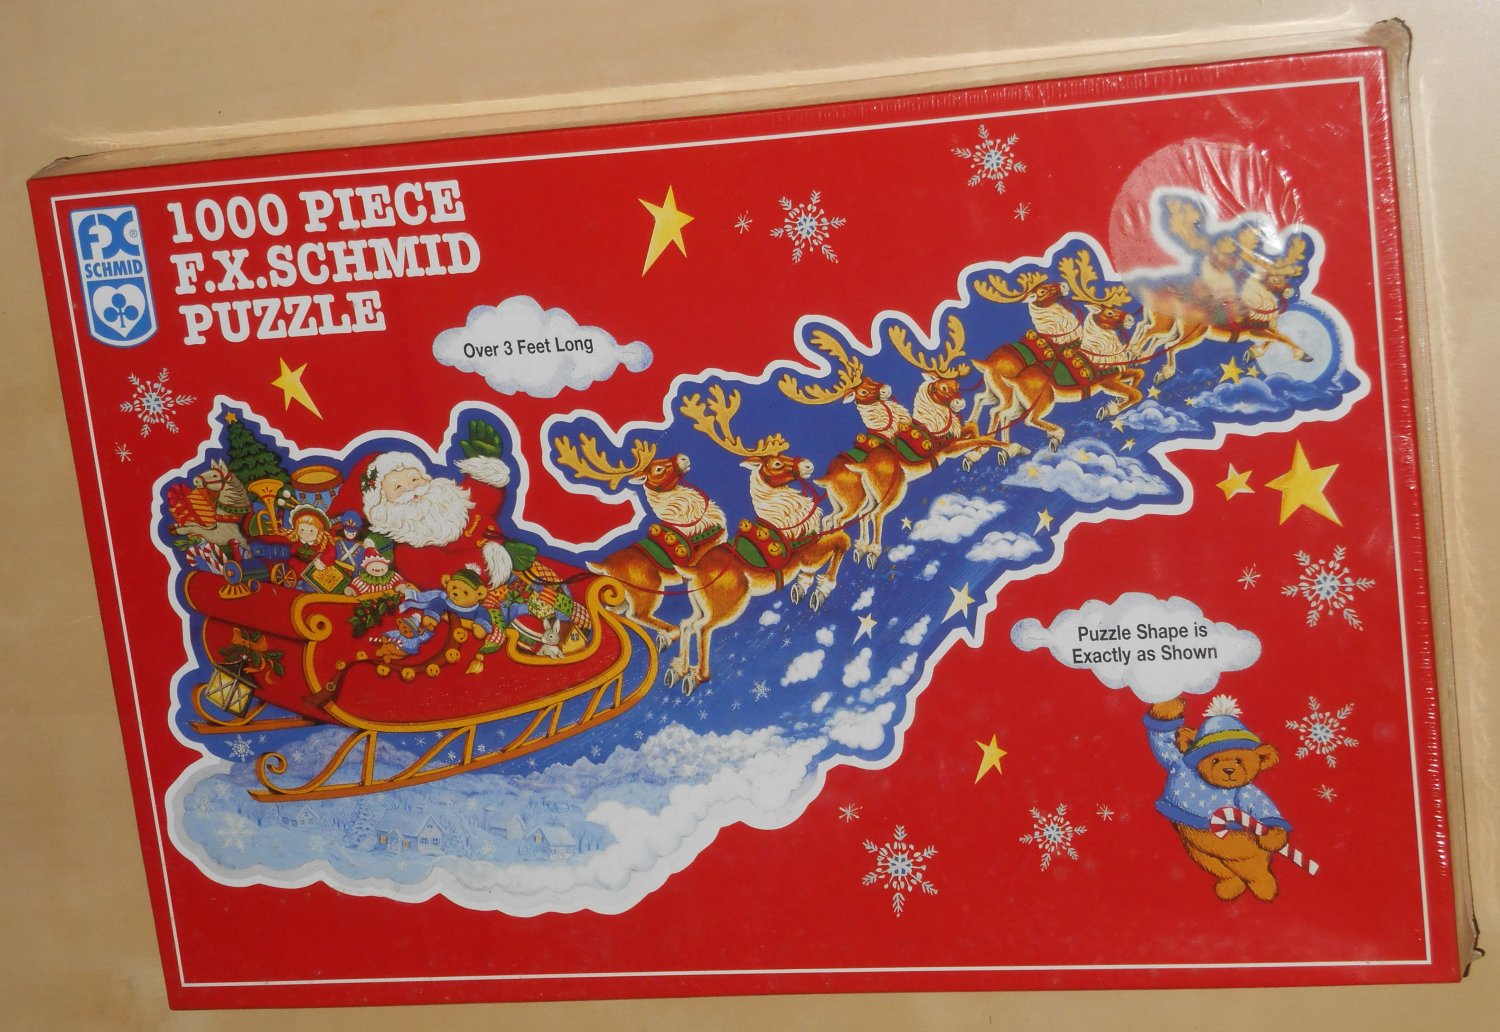 Santa's On His Way 1000 Piece Shaped Jigsaw Puzzle FX Schmid 98165 New in Box 1999 Joyce Cleveland